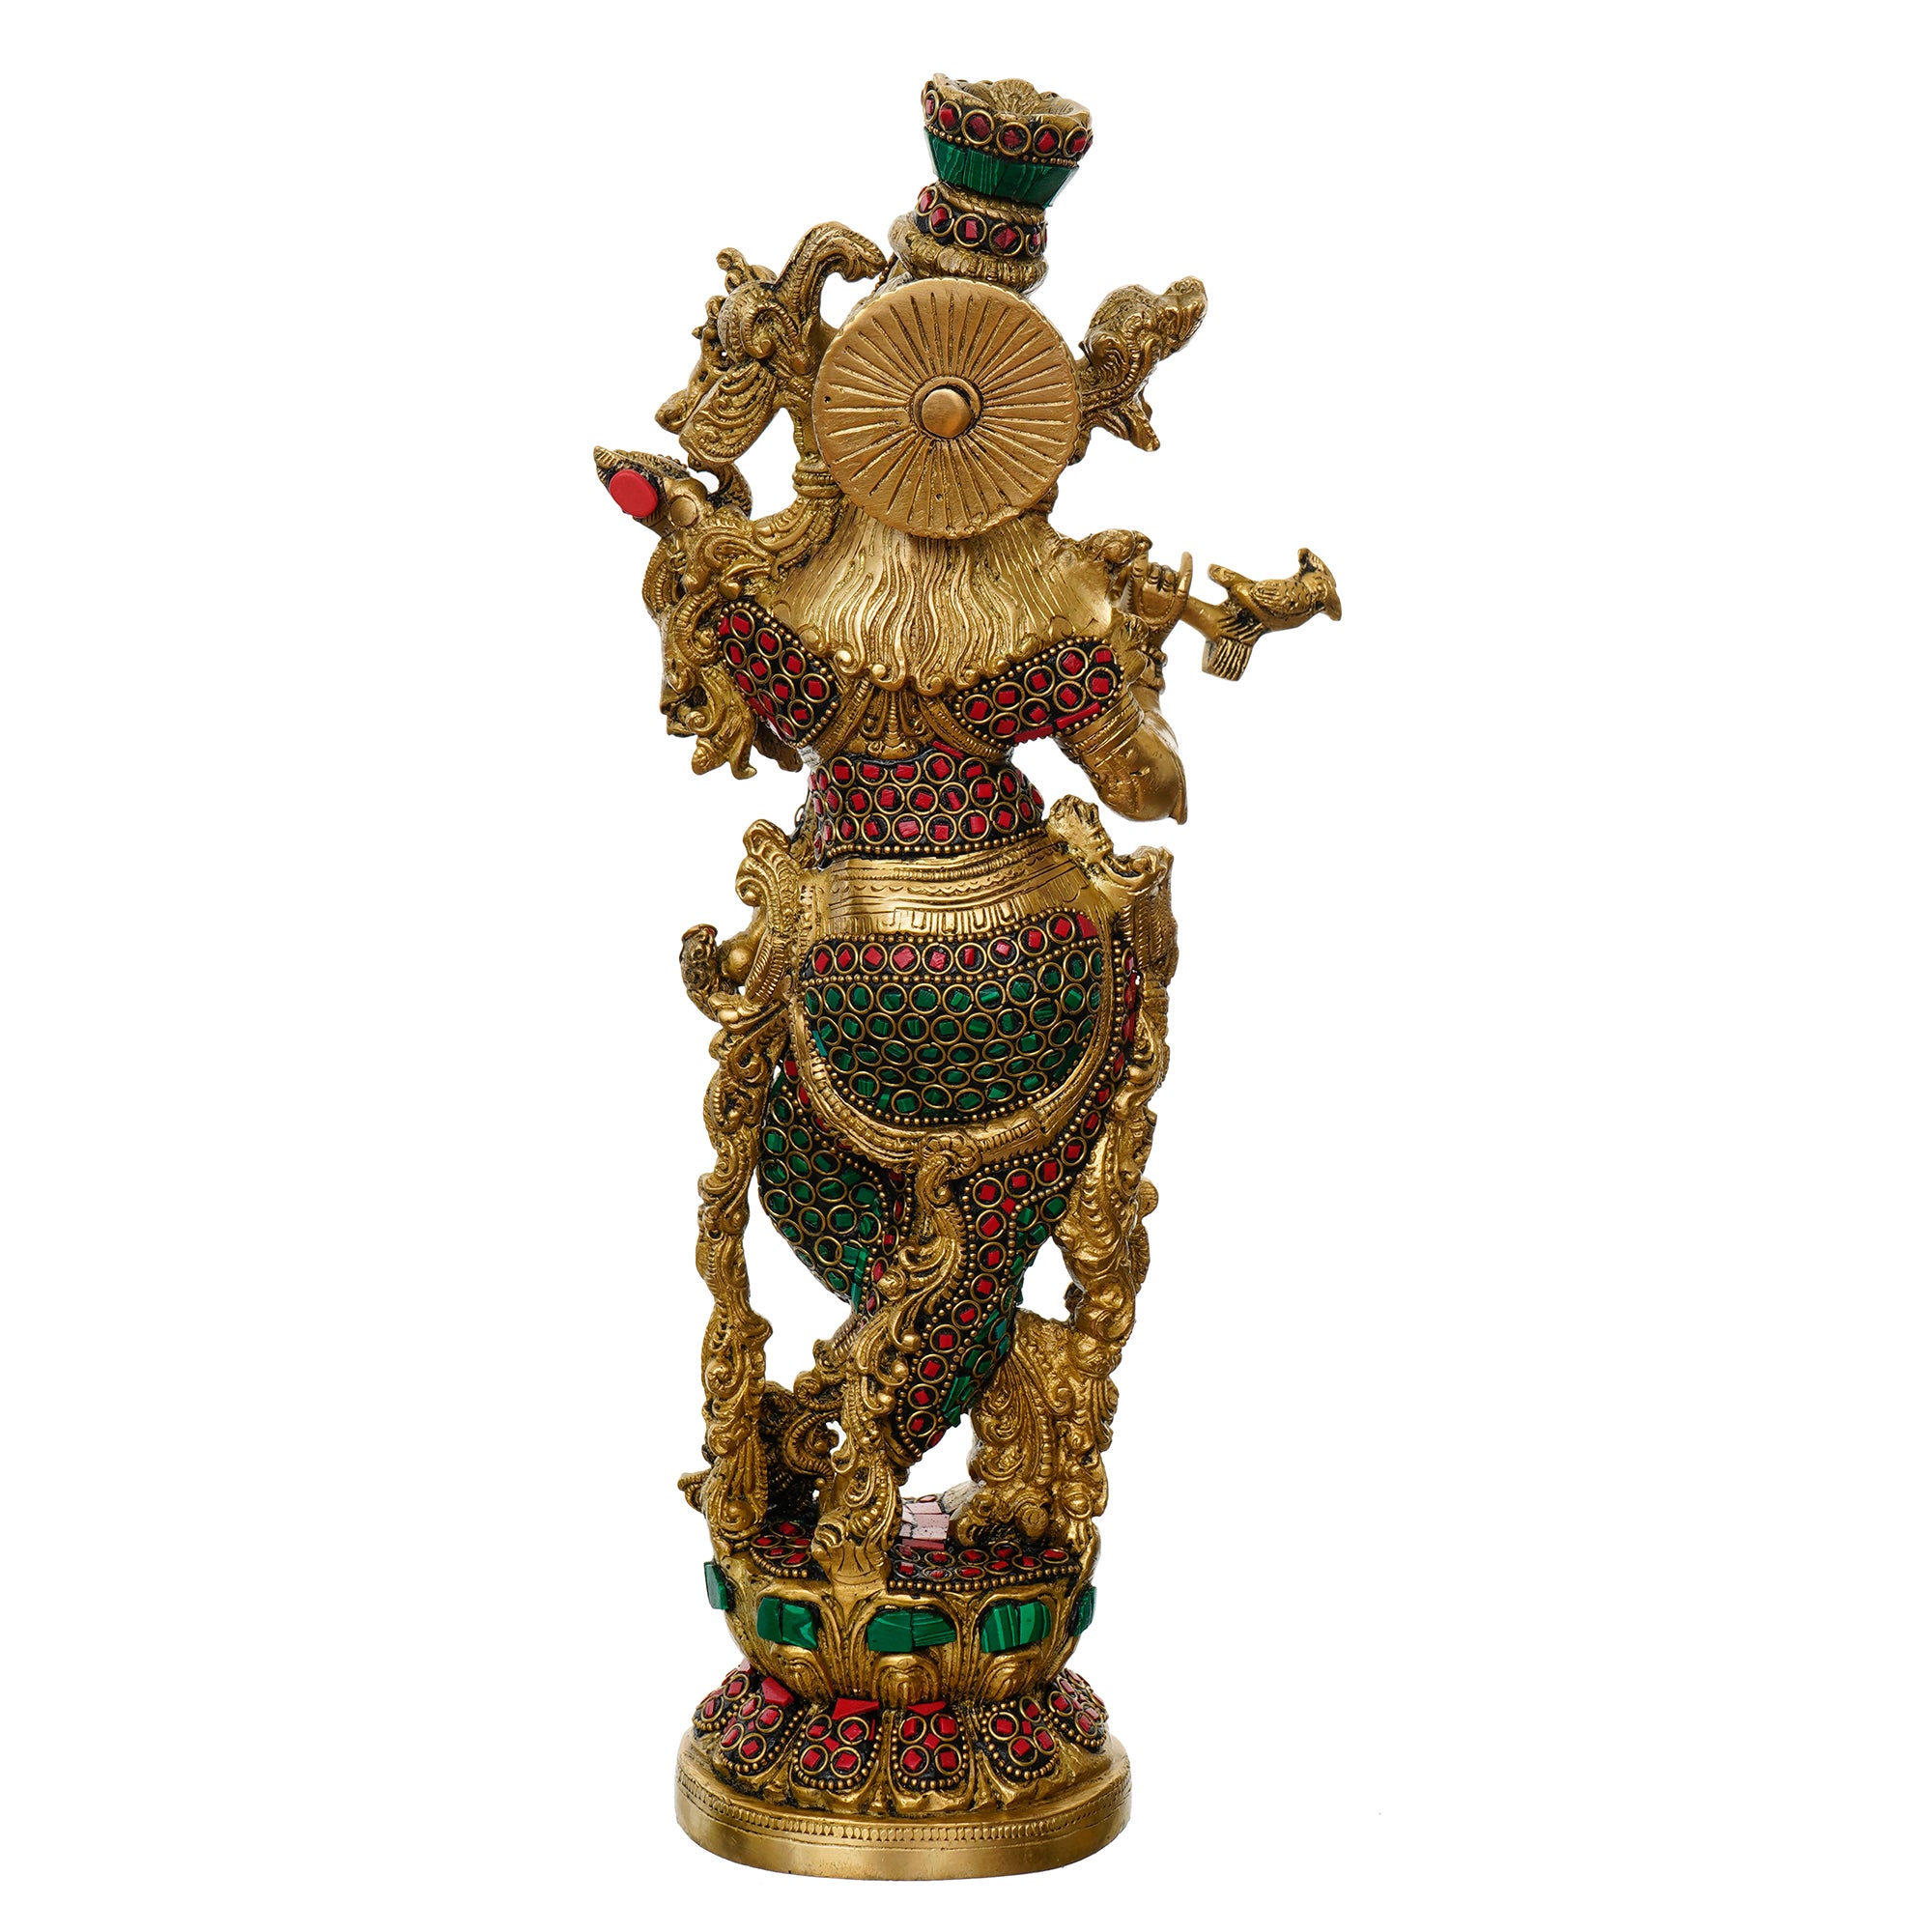 Golden Lord Krishna Playing Flute Handcrafted Brass Idol with Colorful Stone Work 6